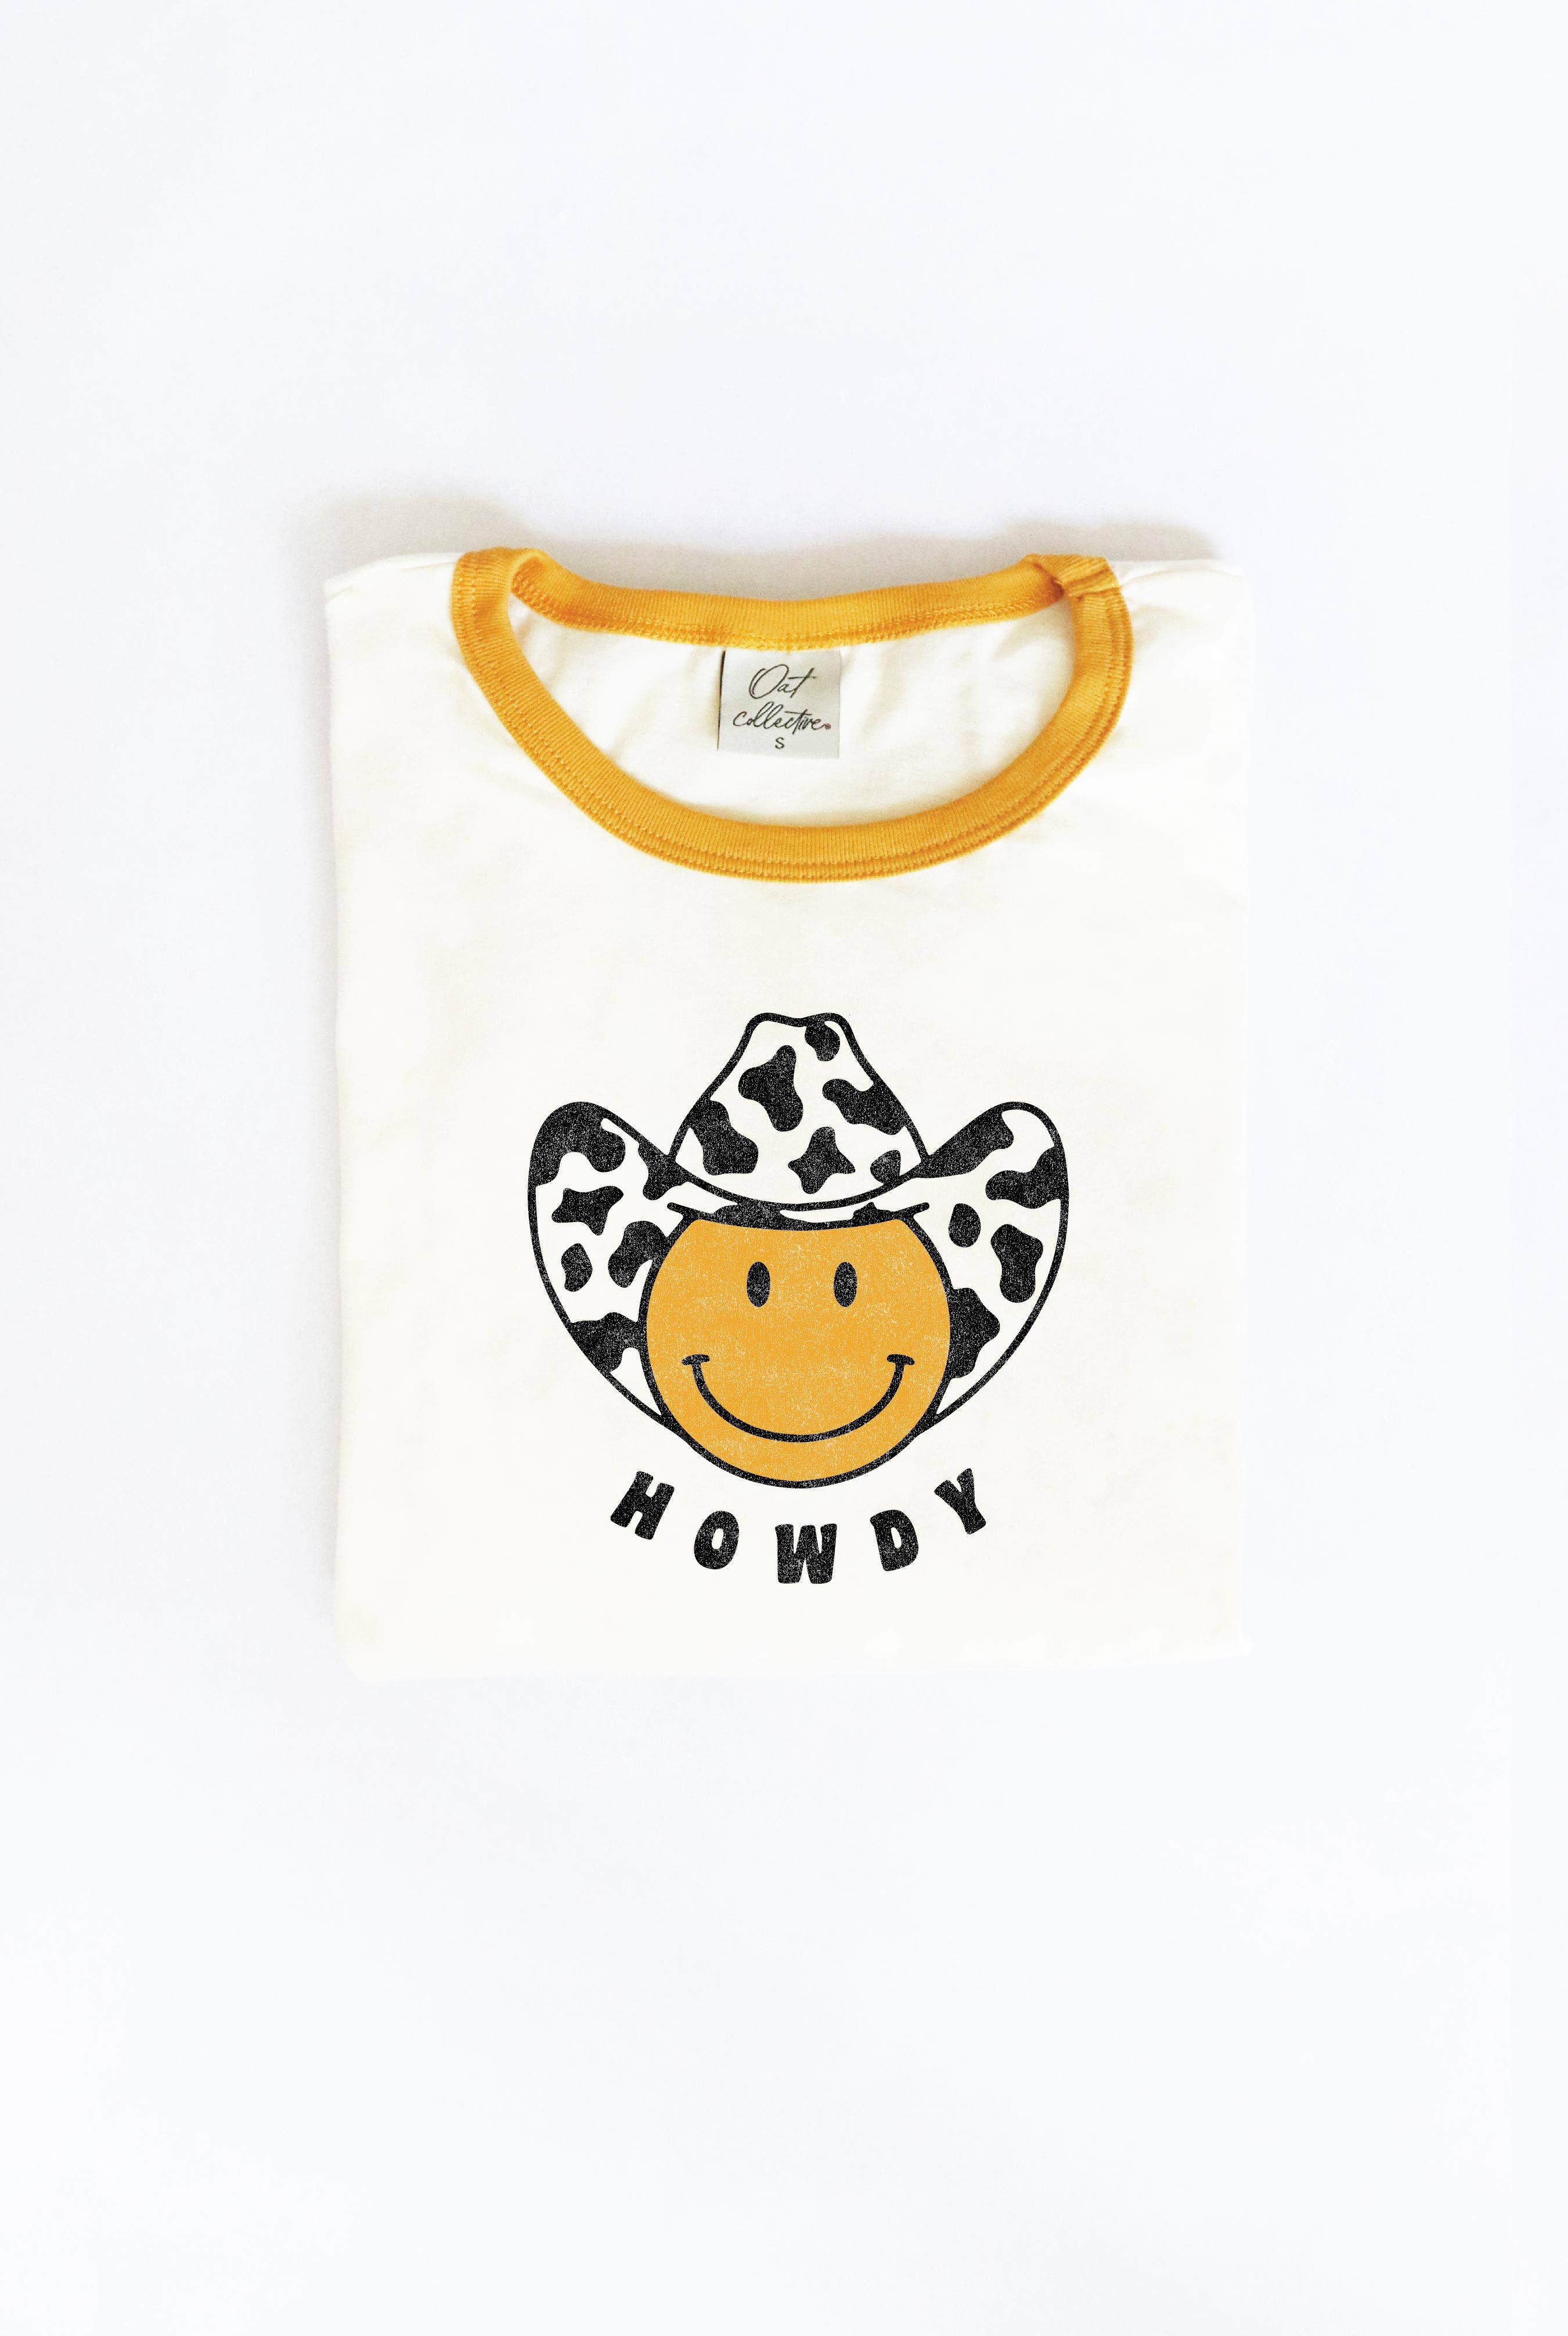 OAT COLLECTIVE - HOWDY SMILEY FACE Ringer Graphic T-Shirt